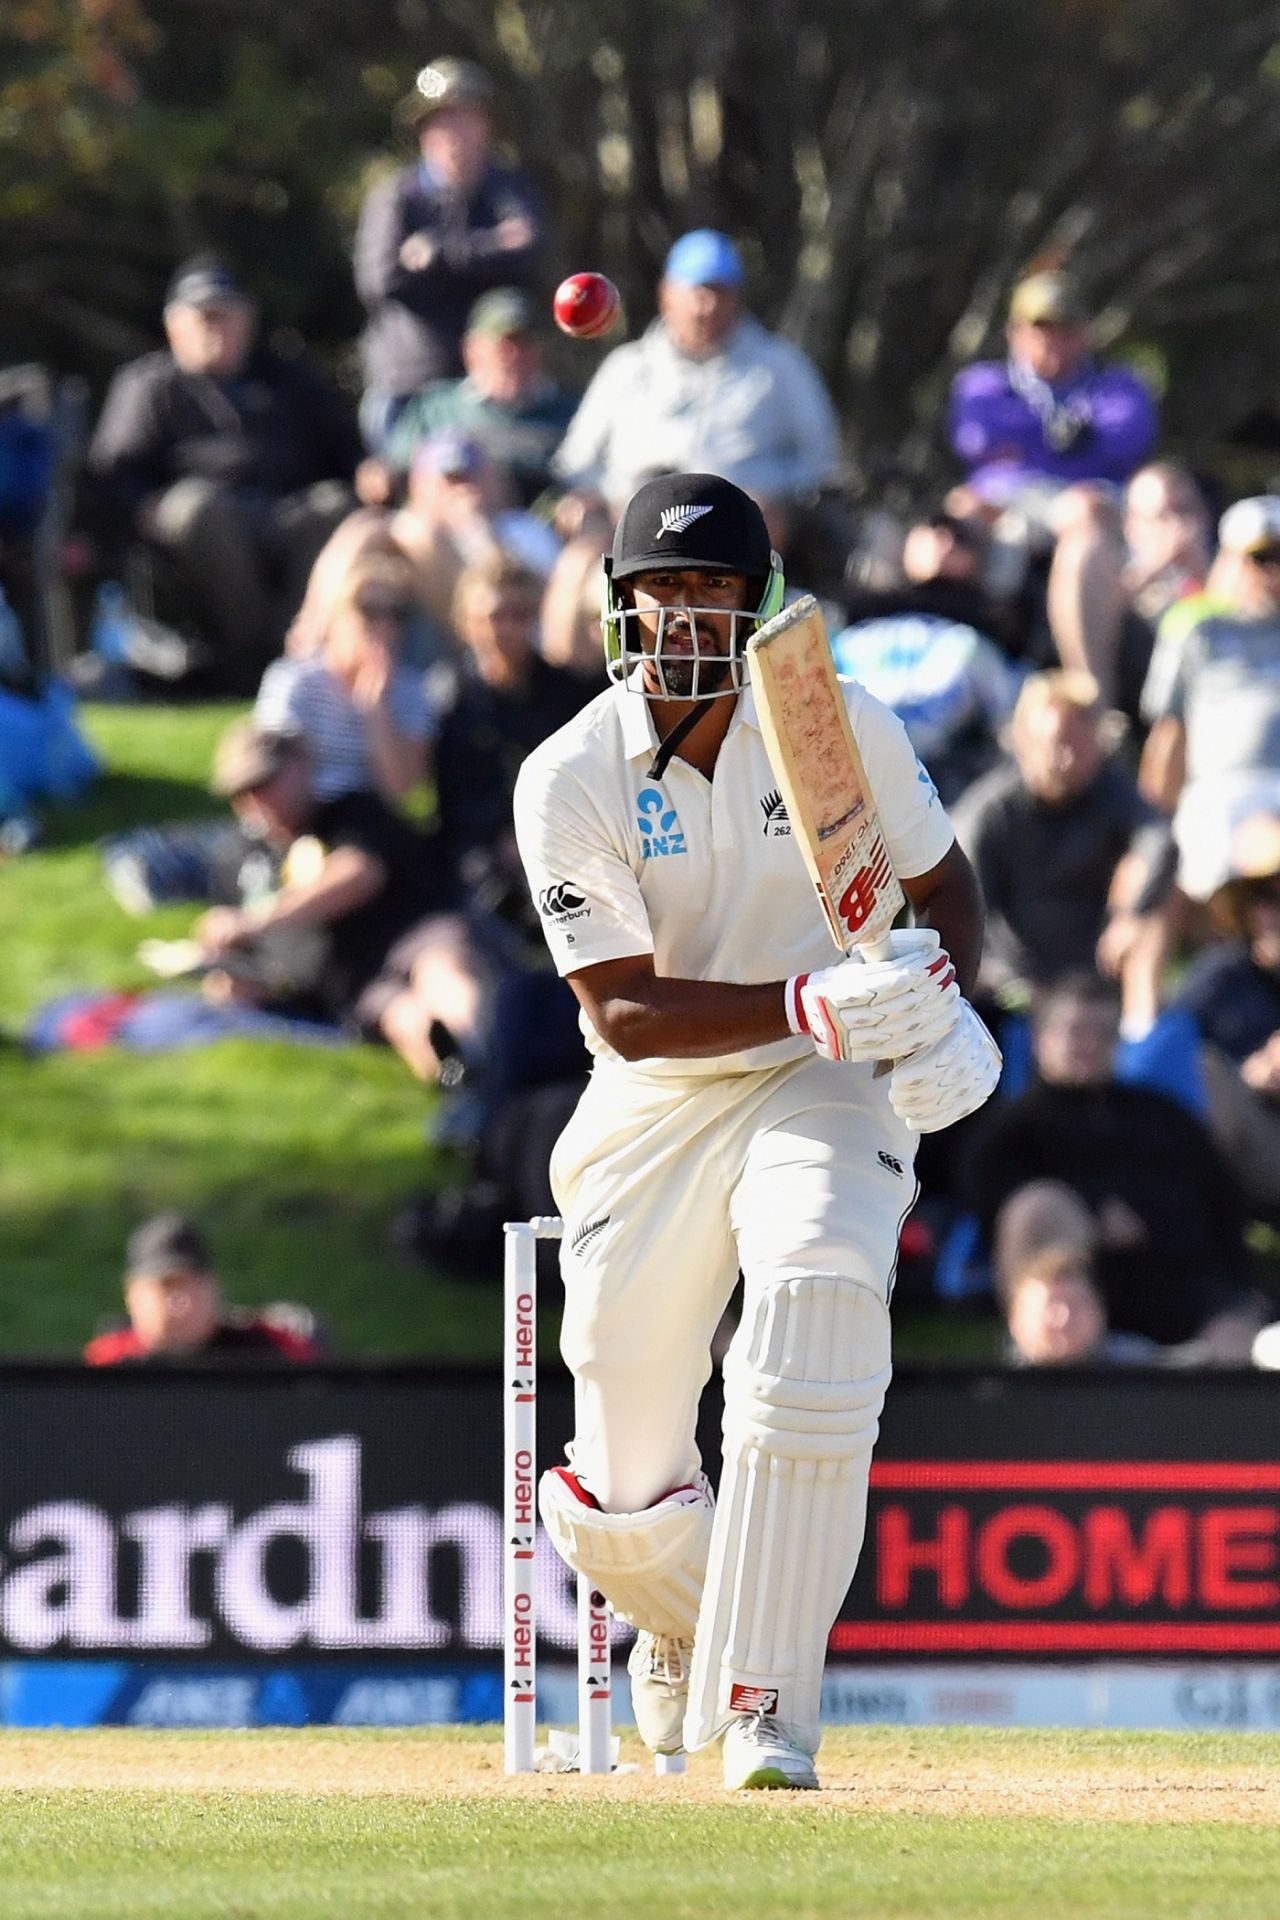 Ish Sodhi struck his third half-century to save the Test match for New Zealand, New Zealand v England, 2nd Test, Christchurch, 5th day, April 3, 2018